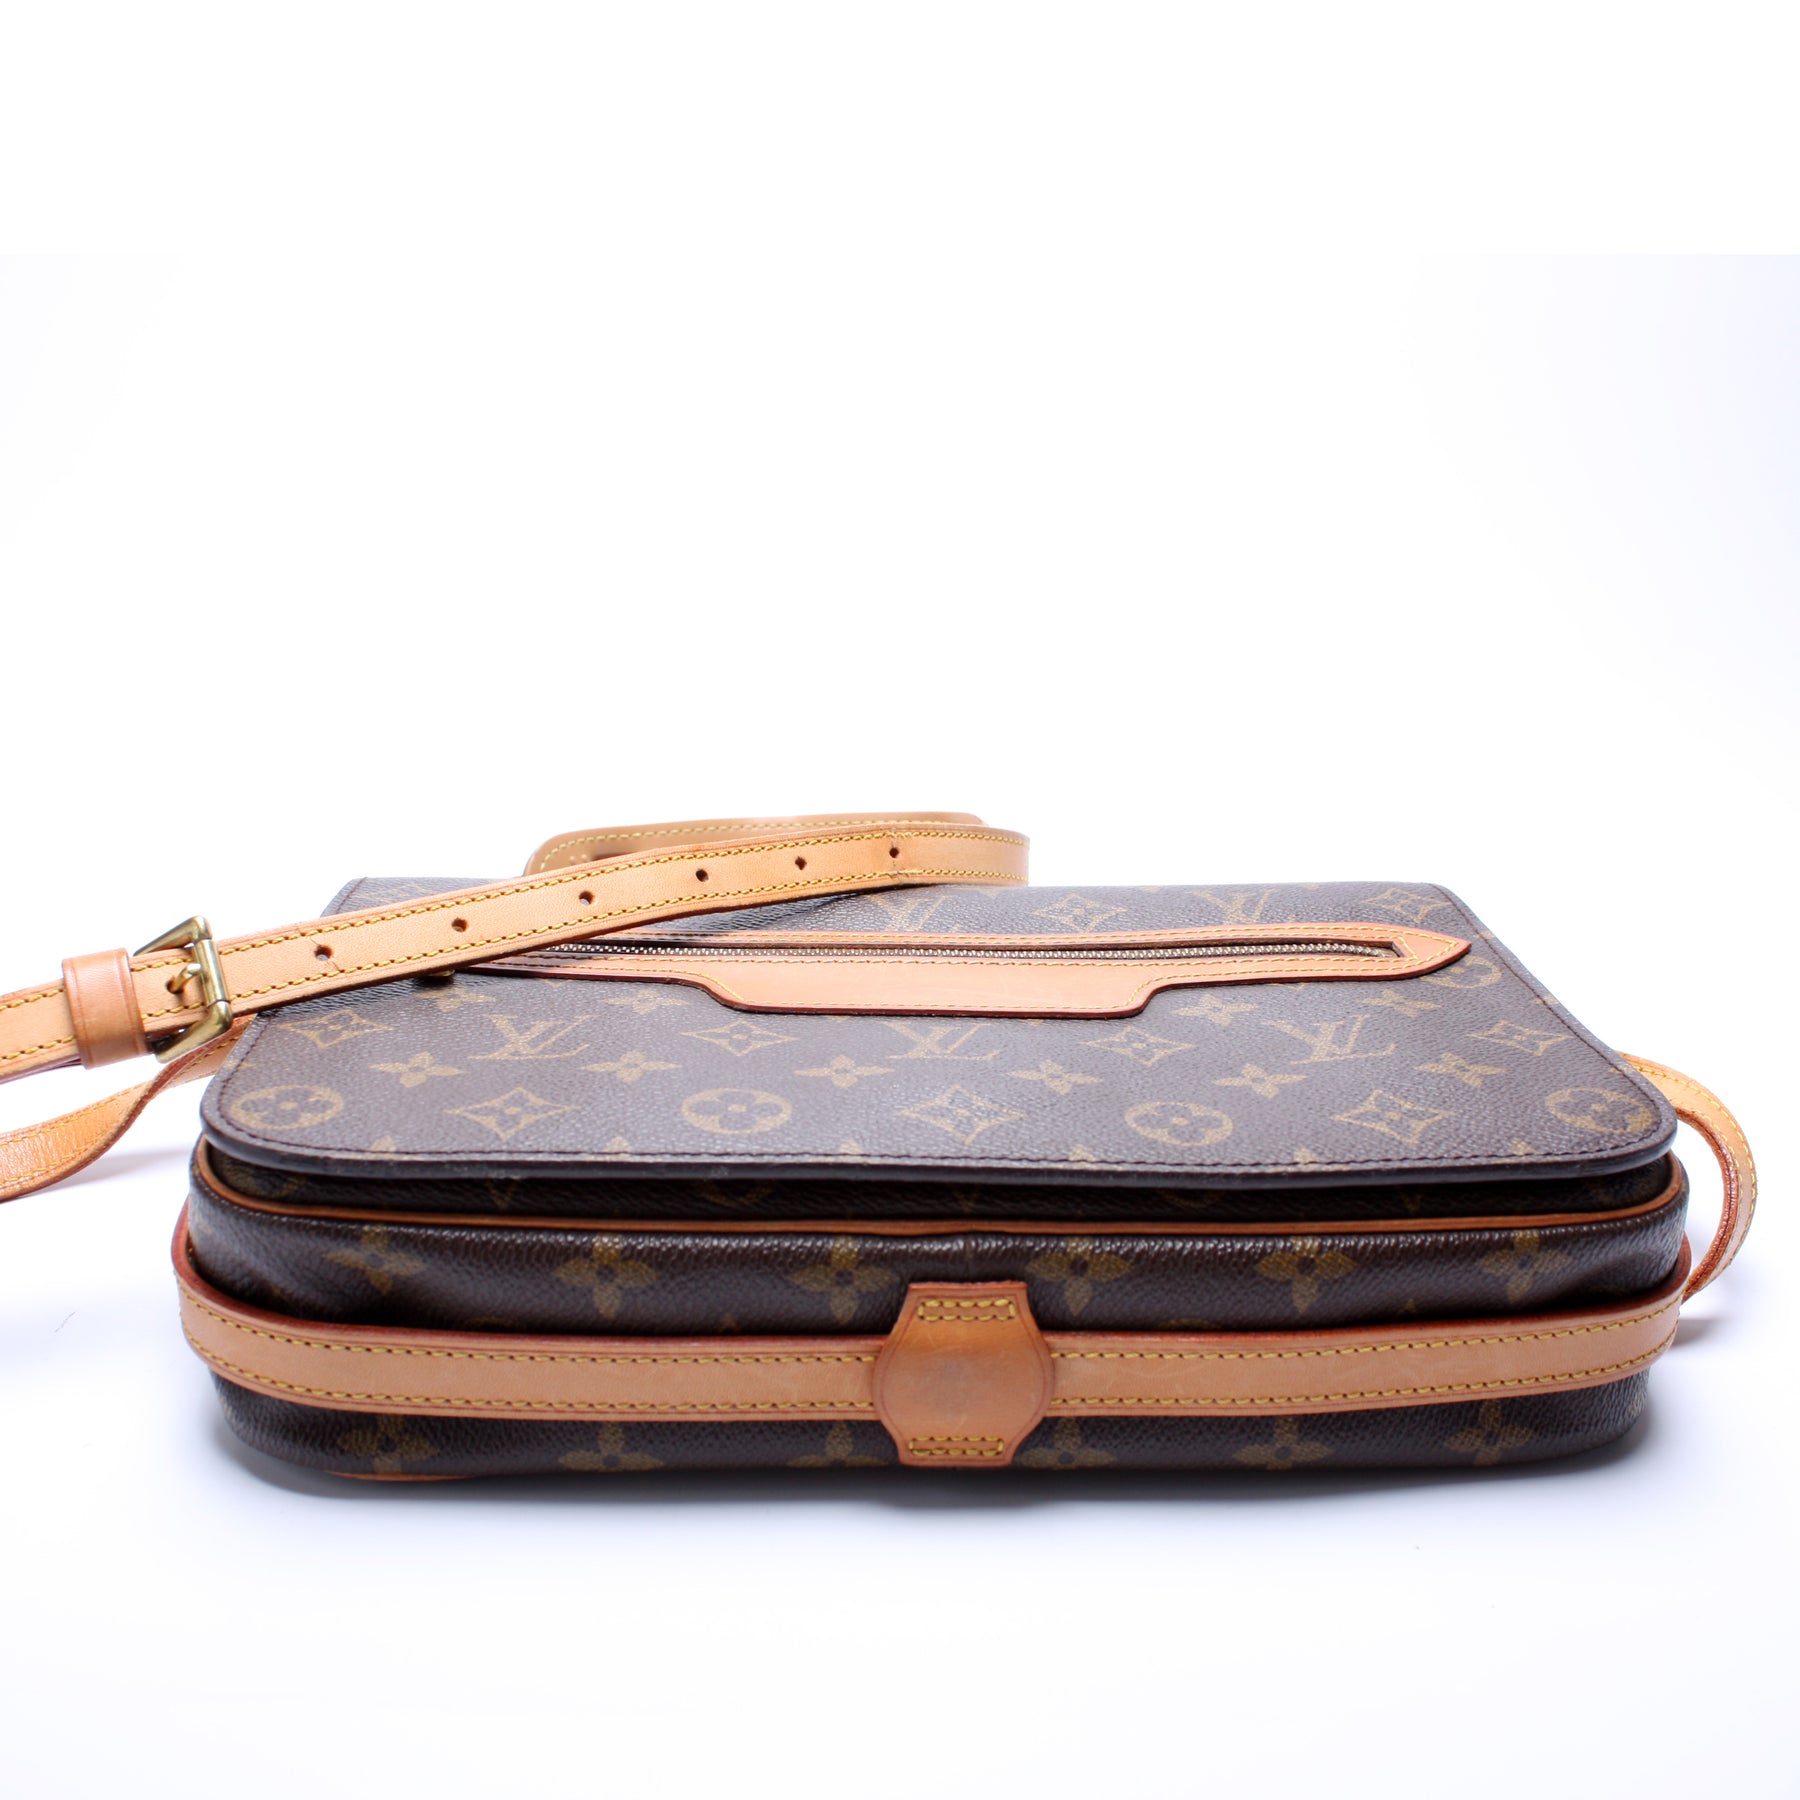 NEVER BEEN USE - LV Monogram Empreinte St Germain PM_Louis  Vuitton_BRANDS_MILAN CLASSIC Luxury Trade Company Since 2007